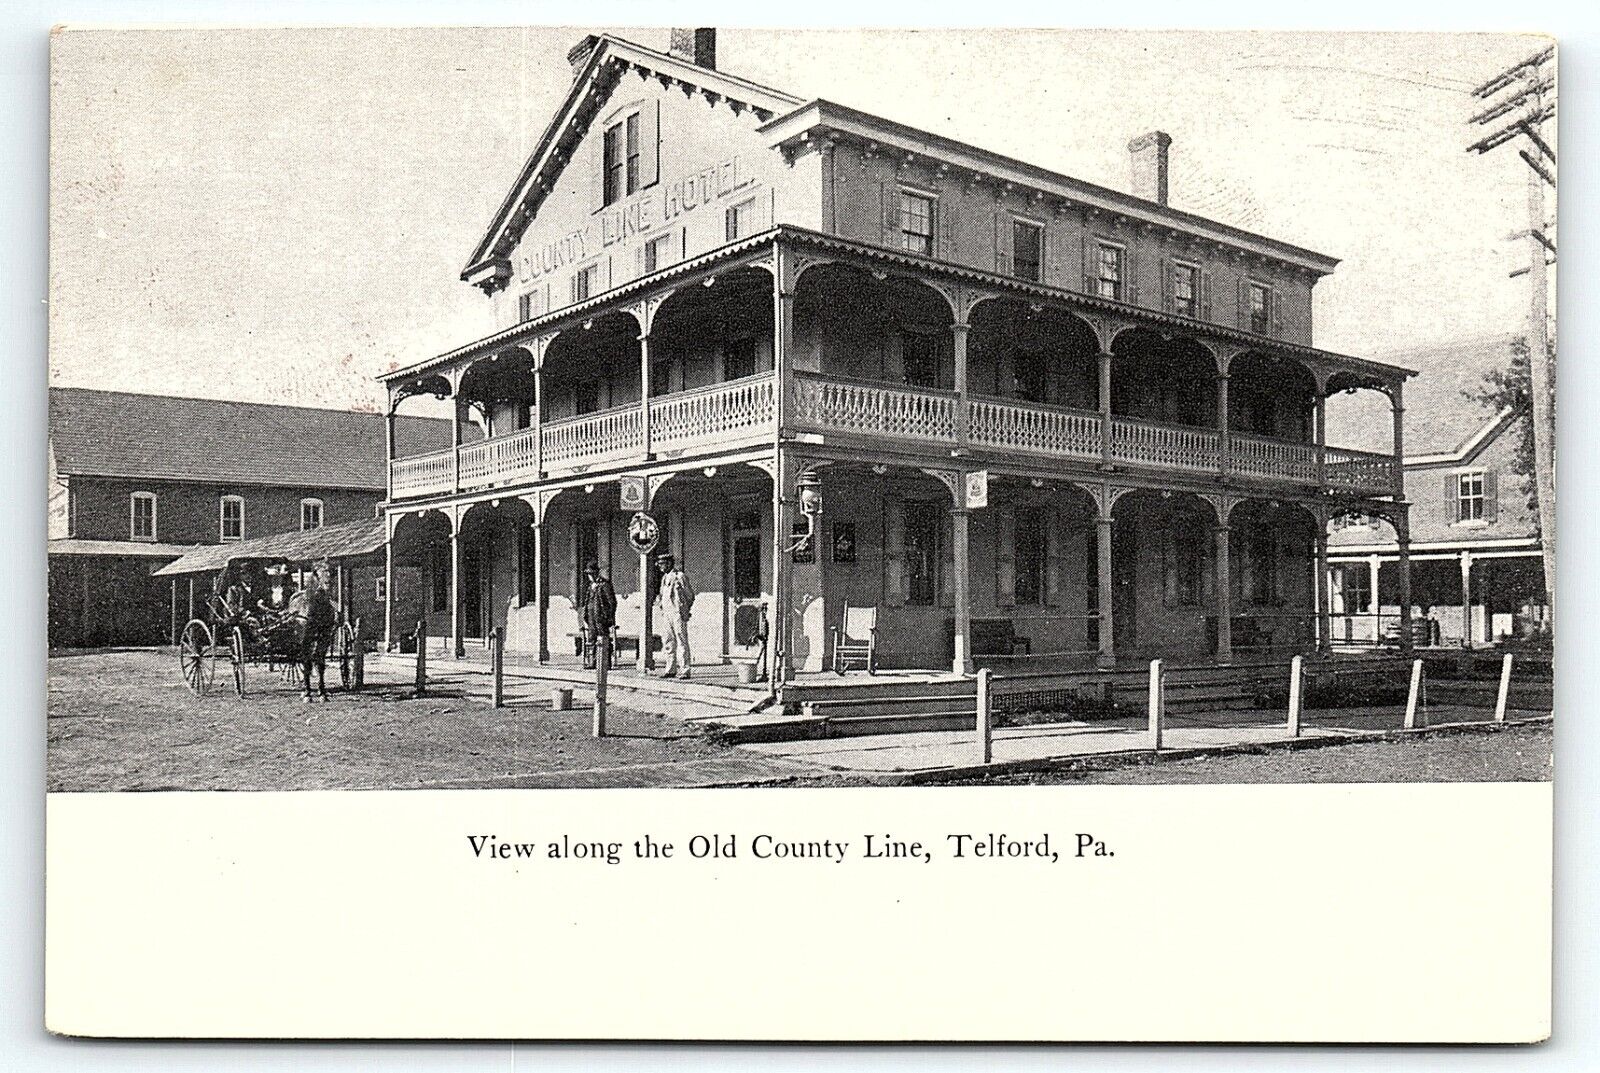 c1910 TELFORD PA COUNTY LINE HOTEL VIEW HORSE AND CARRIAGE EARLY POSTCARD P3995